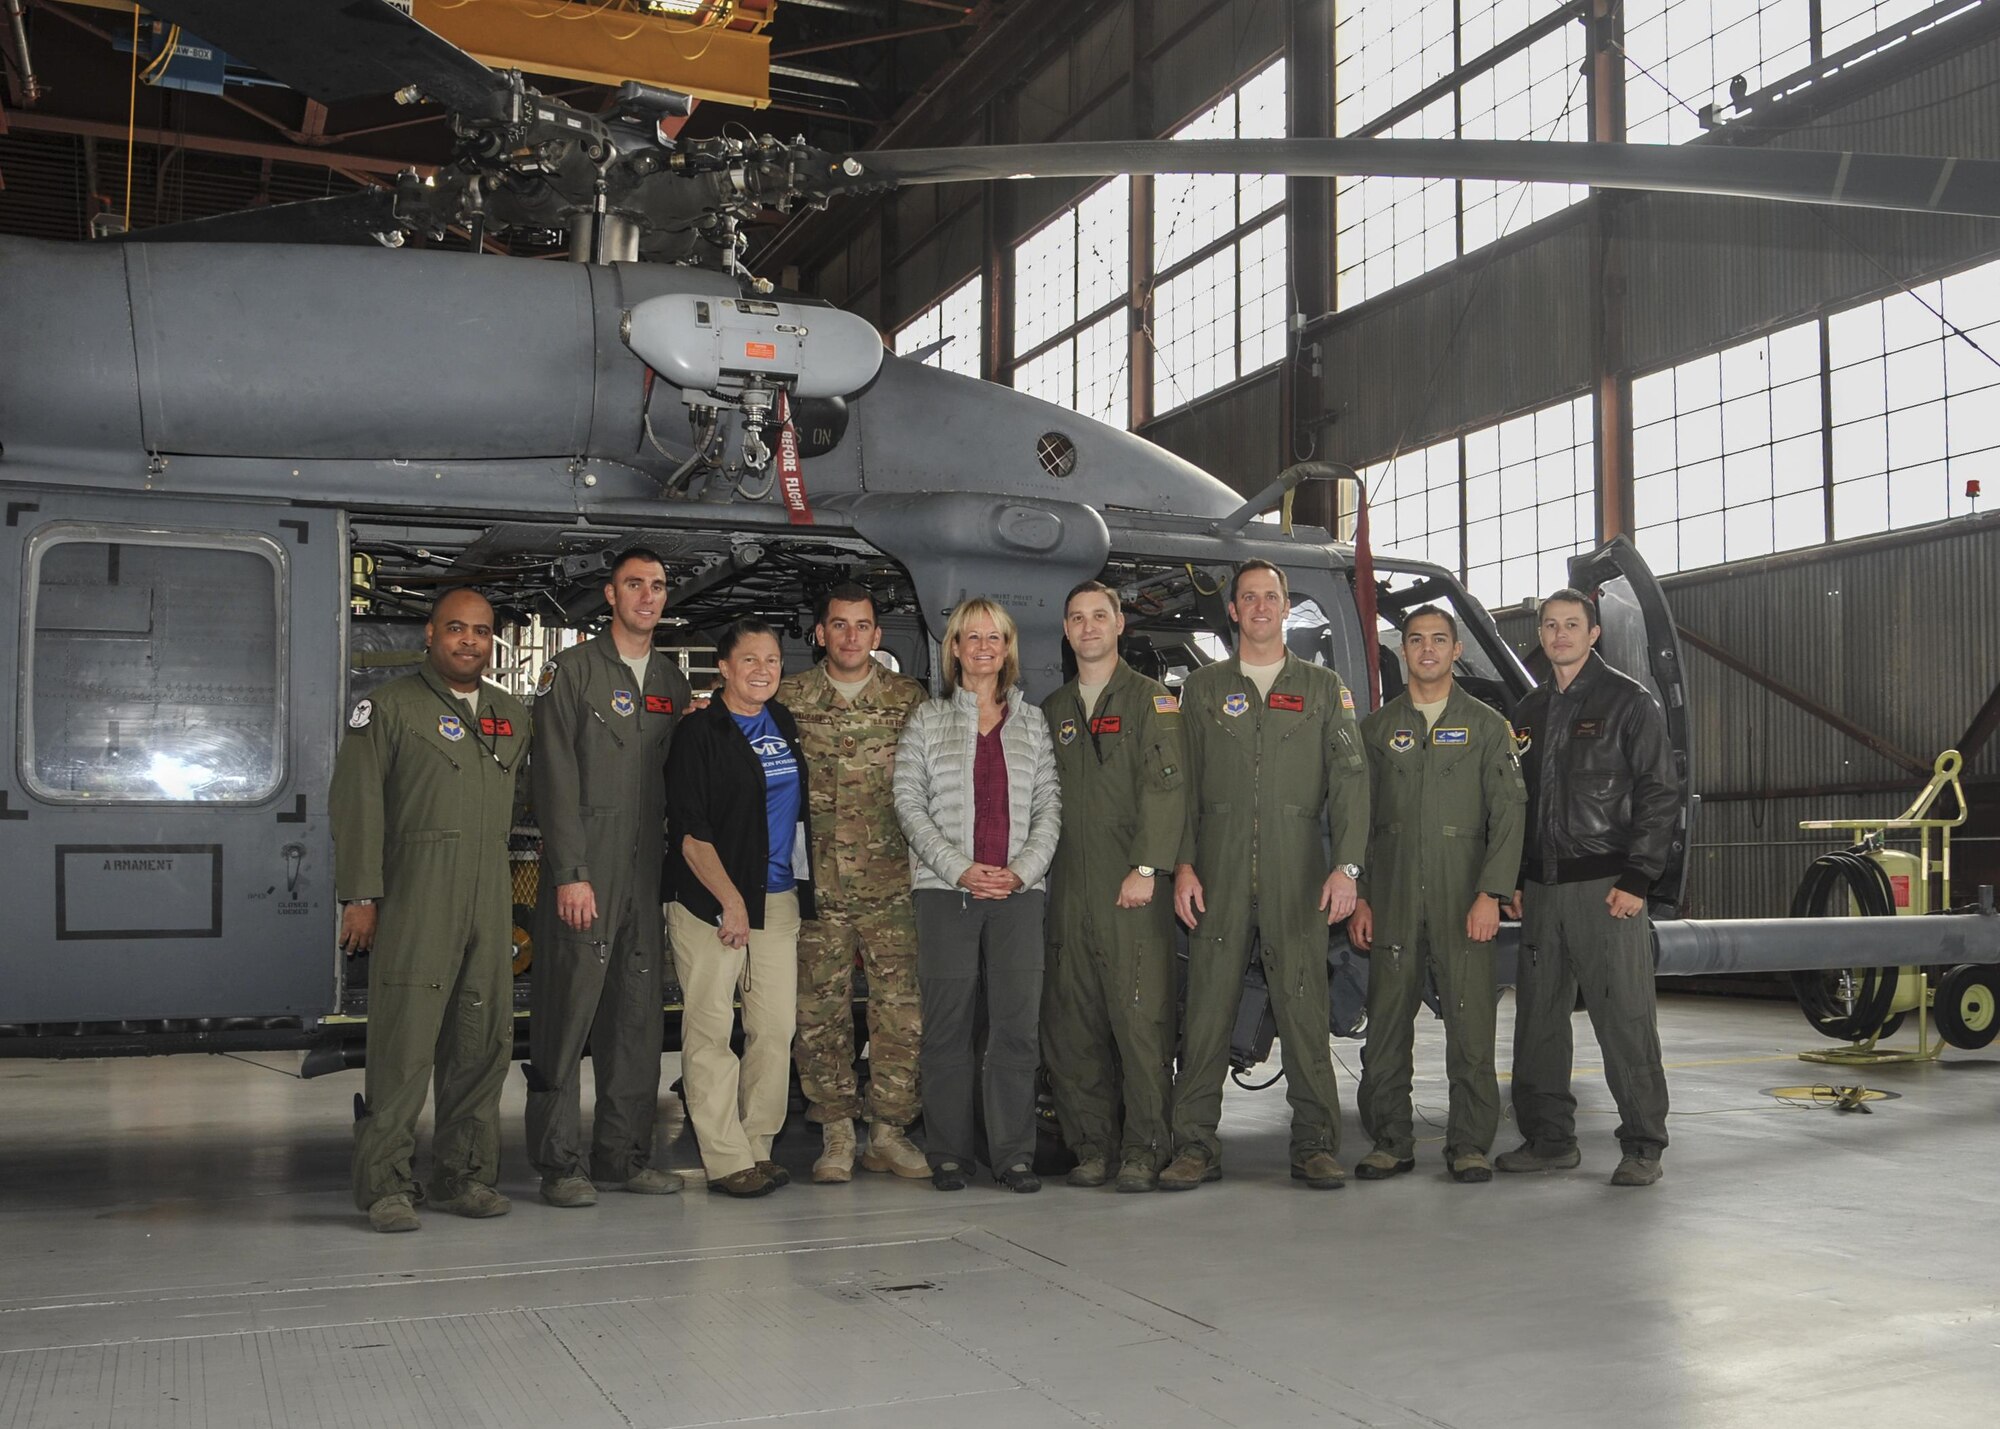 Carol Powell and Ronda Ramsier take a photo with 58th Special Operation Wing and 512th Rescue Squadron members in front of one of the HH-60G Pavehawks used to perform a search-and-rescue for them. Powell and Ramsier  became stranded for 36 hours with their two llamas during an evening hike early August. The hikers returned to Kirtland Dec. 12 to thank the members of the units who rescued them.